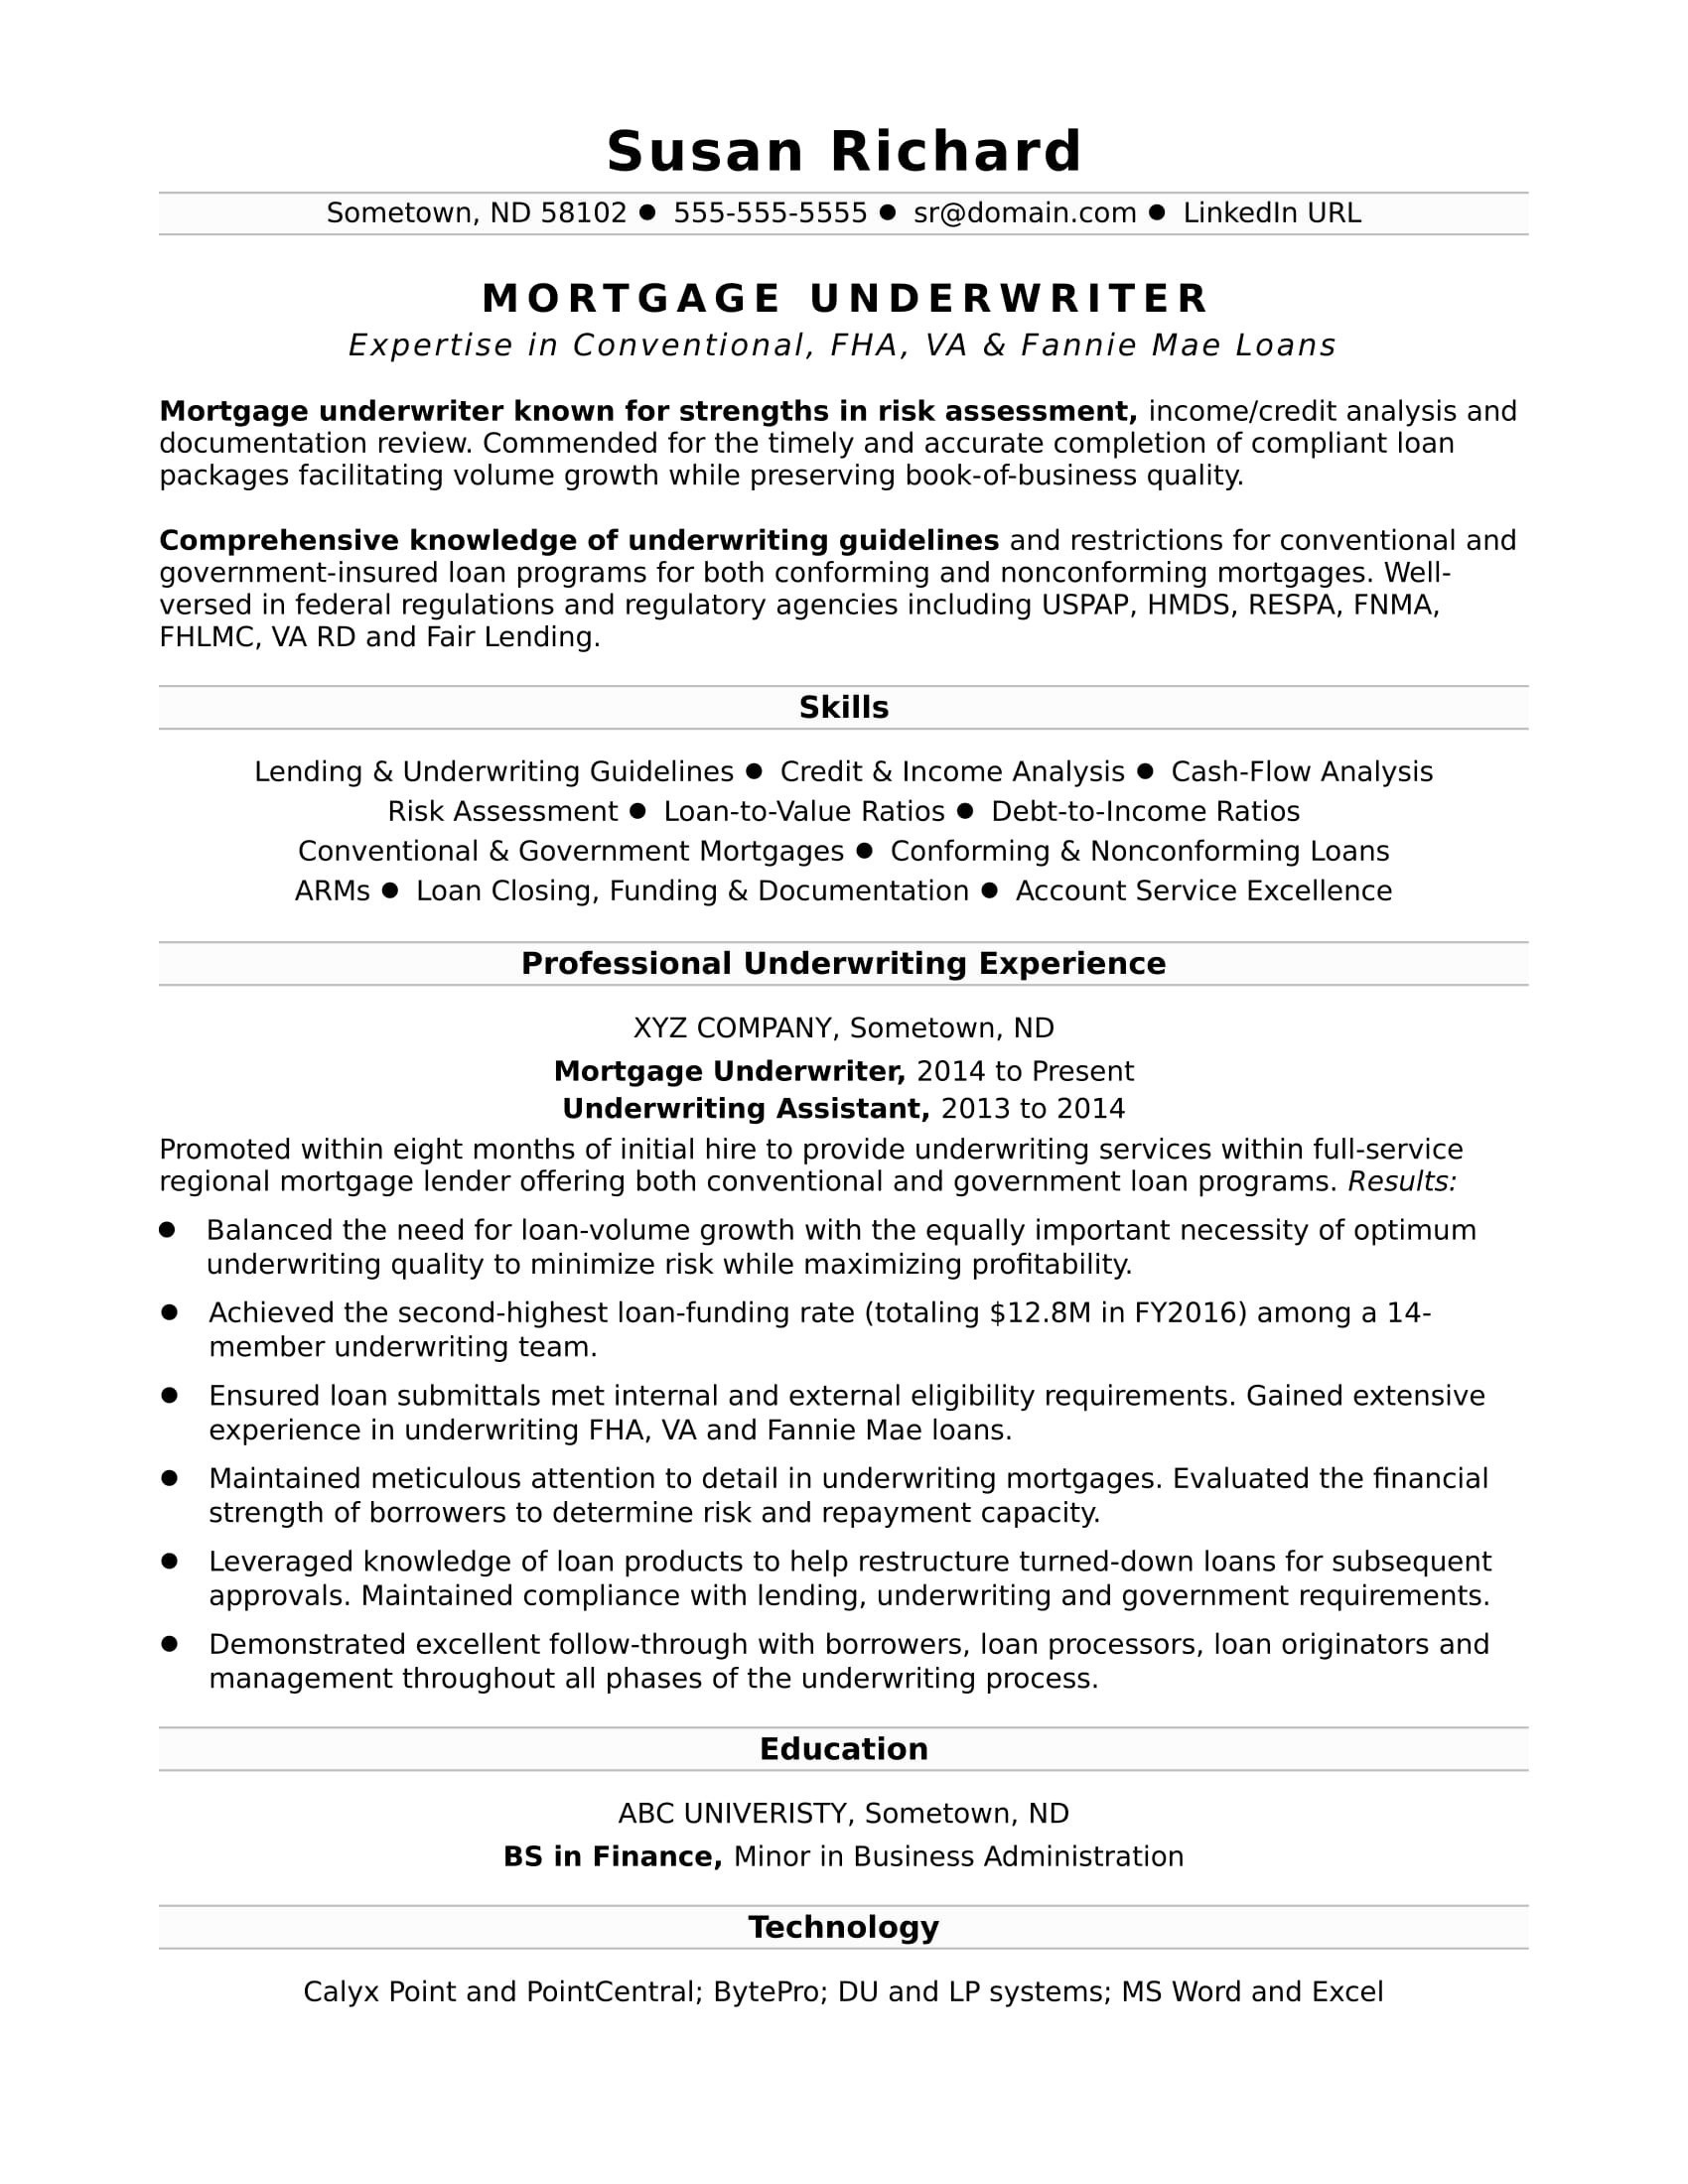 free letter template word Collection-Free Resume Search In India Unique New Programmer Resume Lovely Resume Cover Letter formatted Resume 0d 16-e